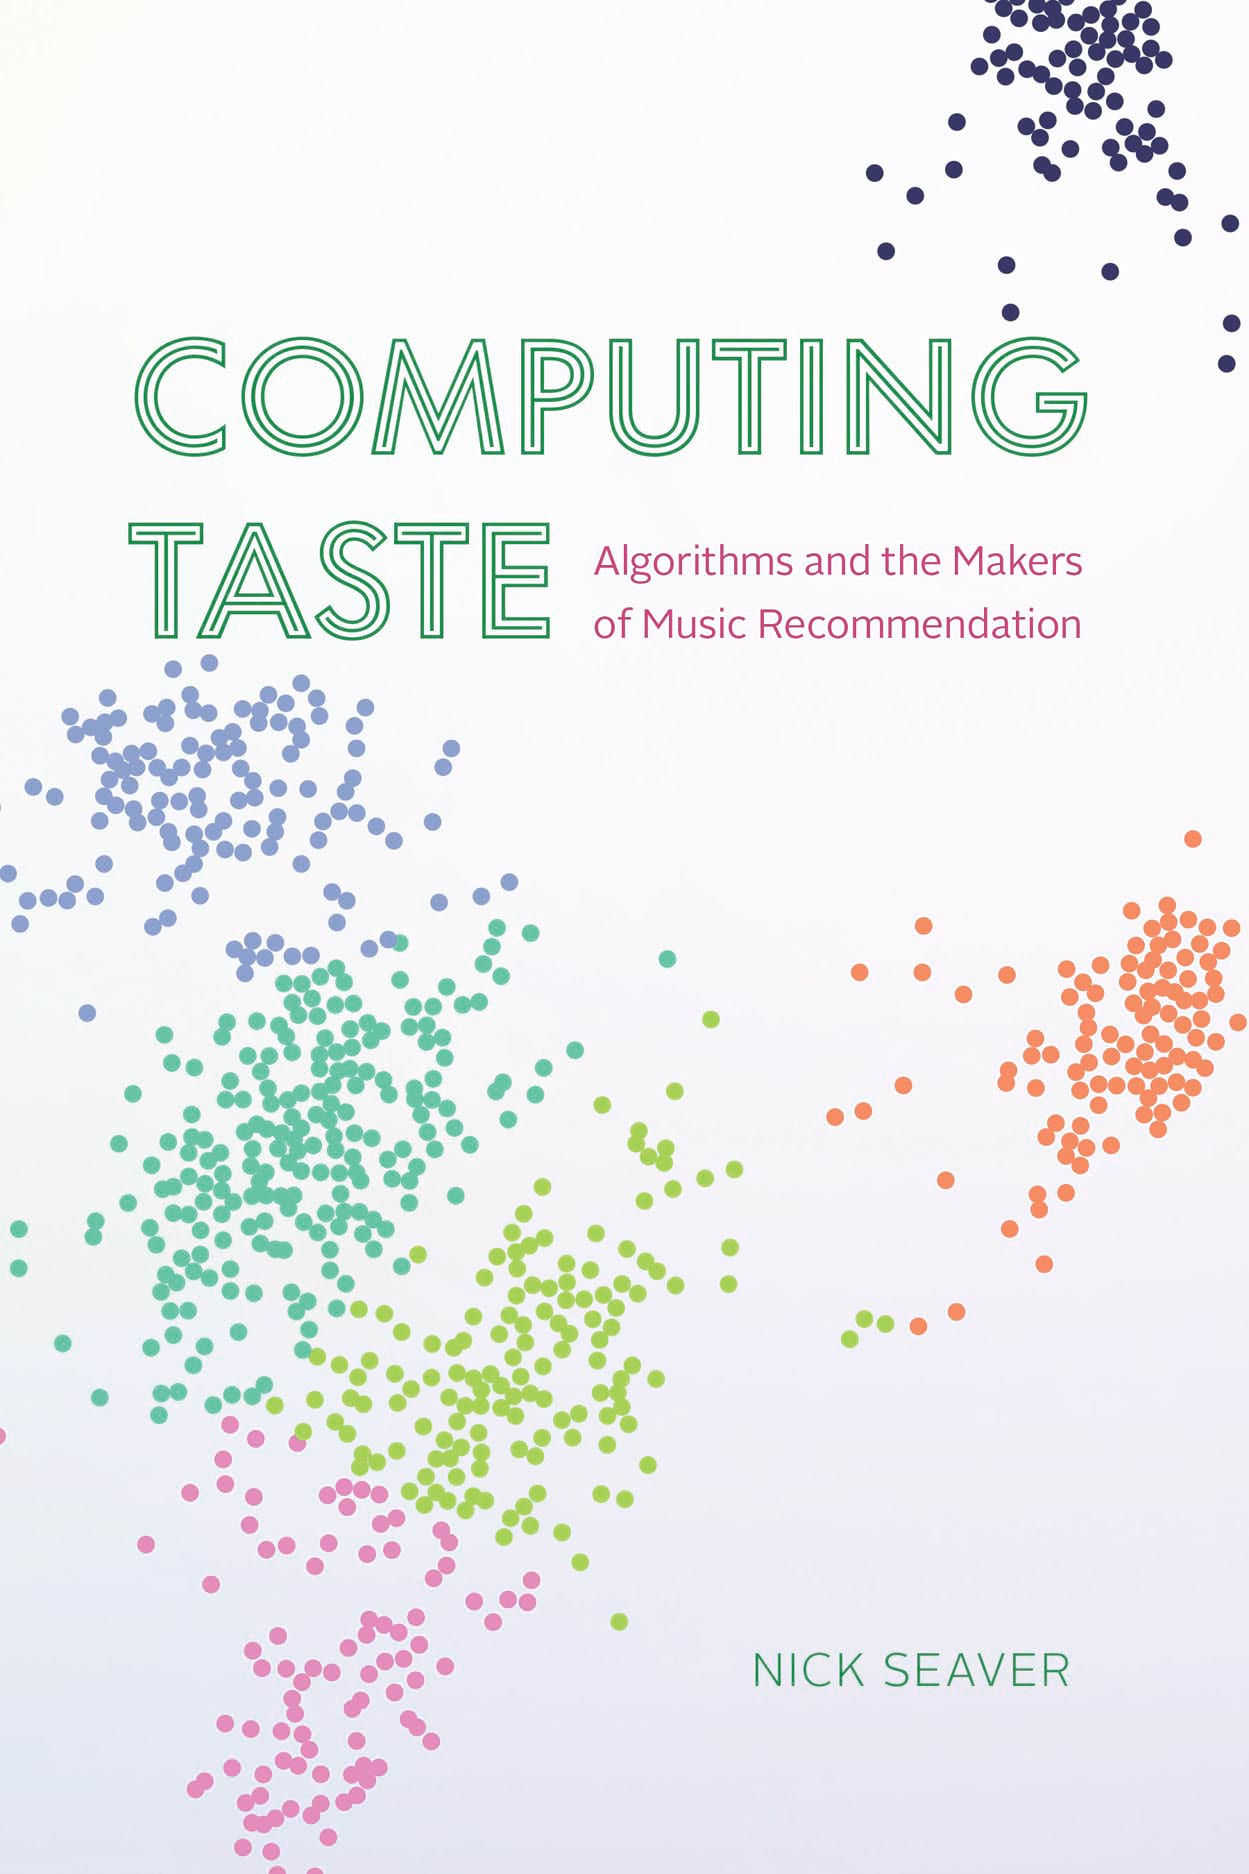 Book cover of Computing Taste: Algorithms and the Maker of Music Recommendation Systems, by Nick Seaver. Colorful clusters of dots are arrayed against a white background.